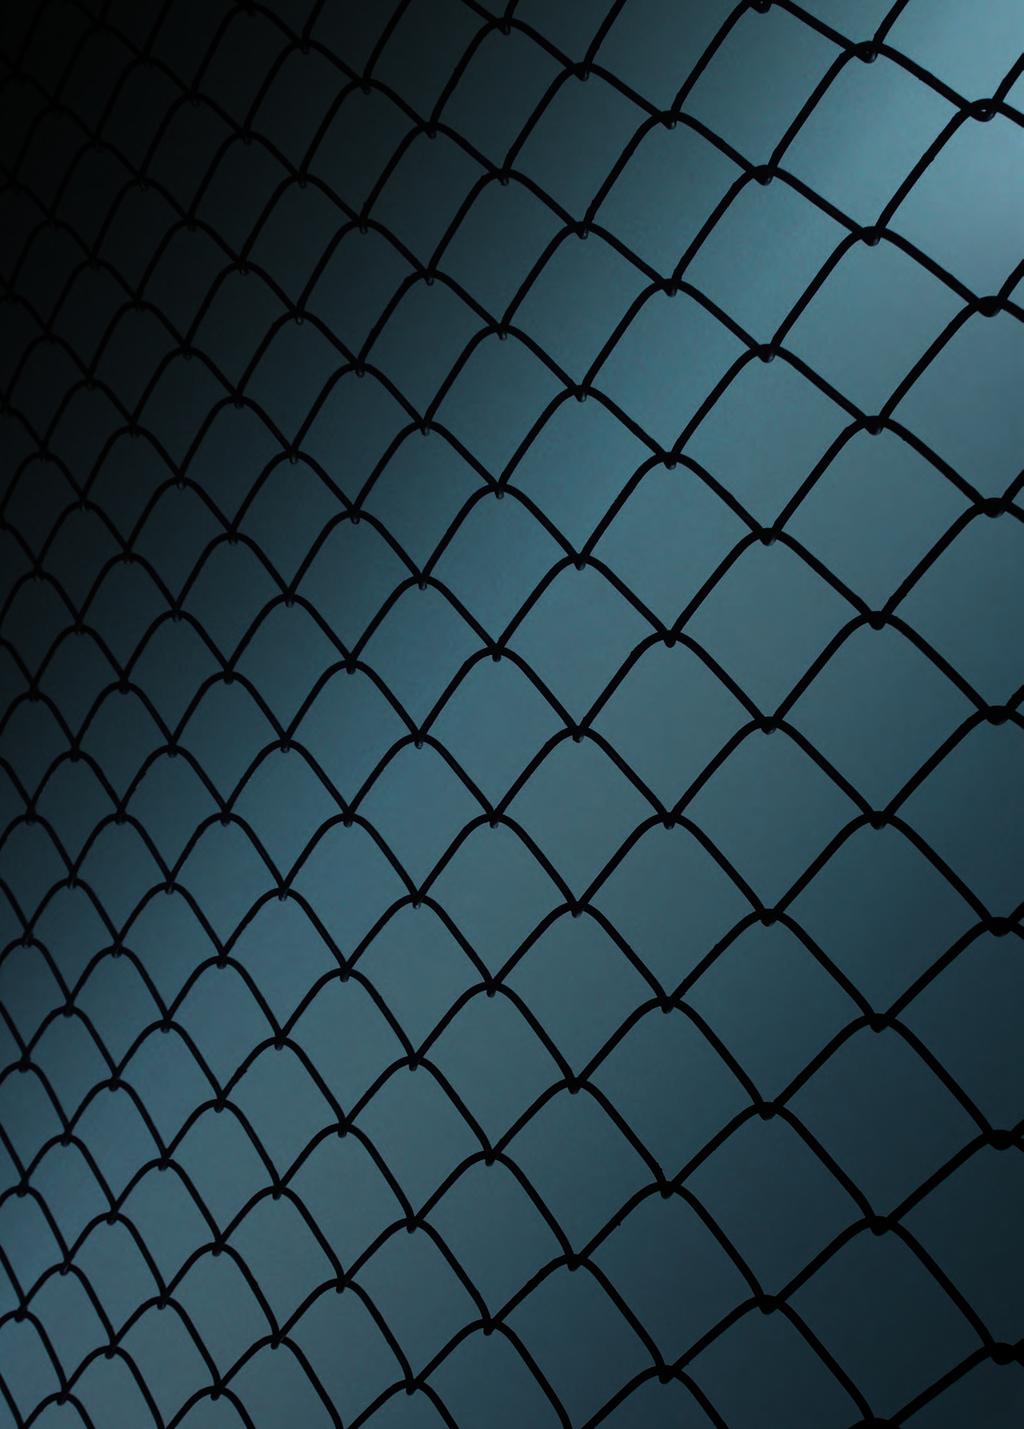 QATAR CHAIN LINK FENCING NETS Material: Galvanized iron wire they are also available in coated PVC.